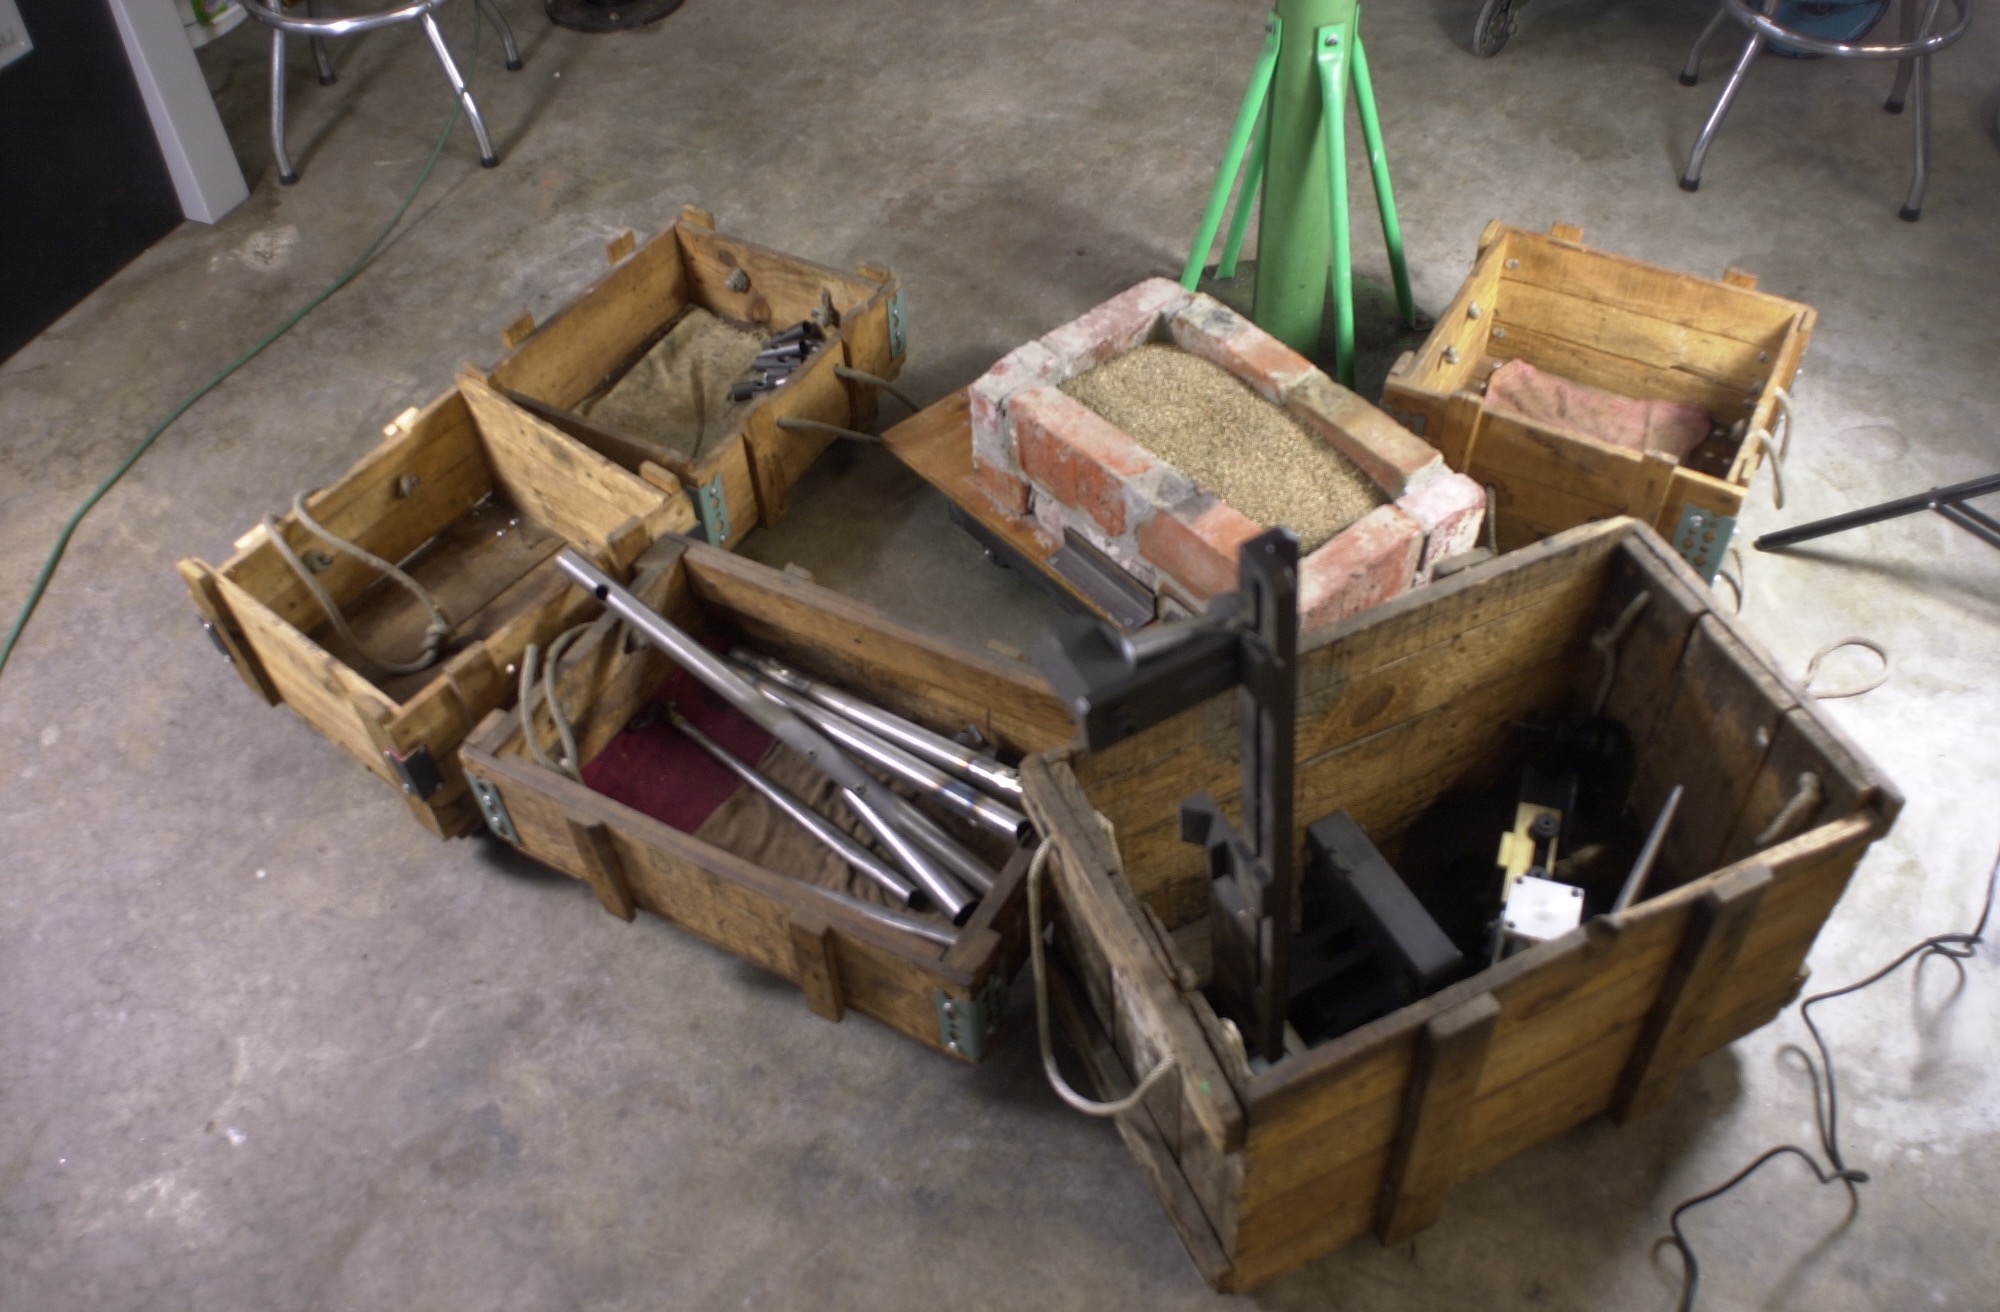 Six rolling carts.  Some hold fixtures, others hold tubes soon to become a frame and others hold lathe/mill projects in various stages of completion.  The latest is the brazed carbide mitre cutter brick cooling cart filled with vermiculite.  Now if only I had elves to help while I am sleeping.